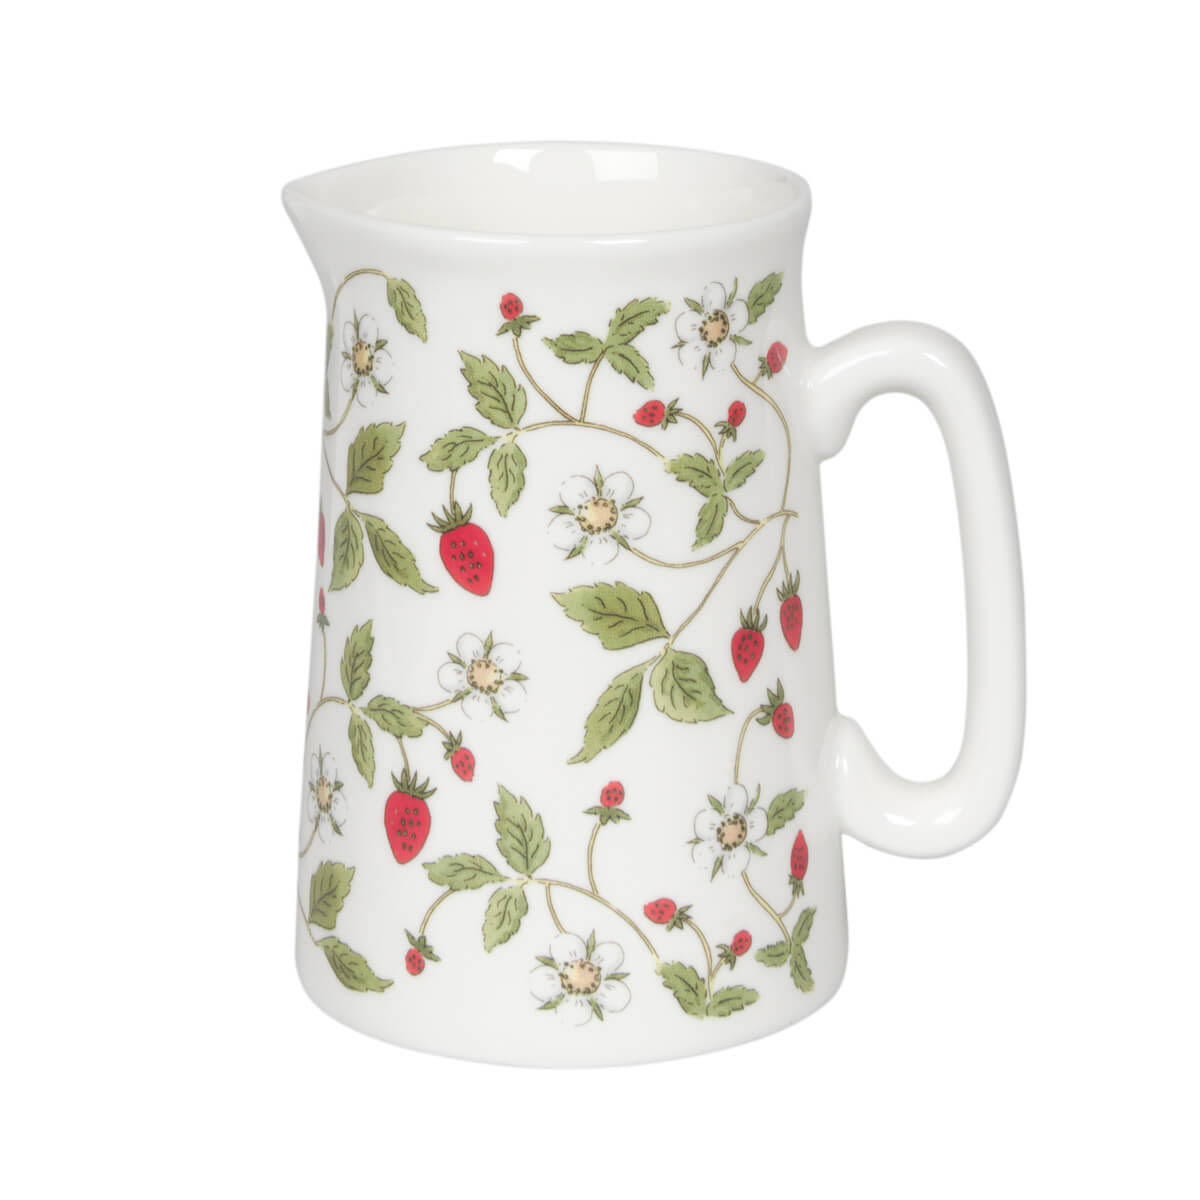 Strawberries Jug - Small by Sophie Allport